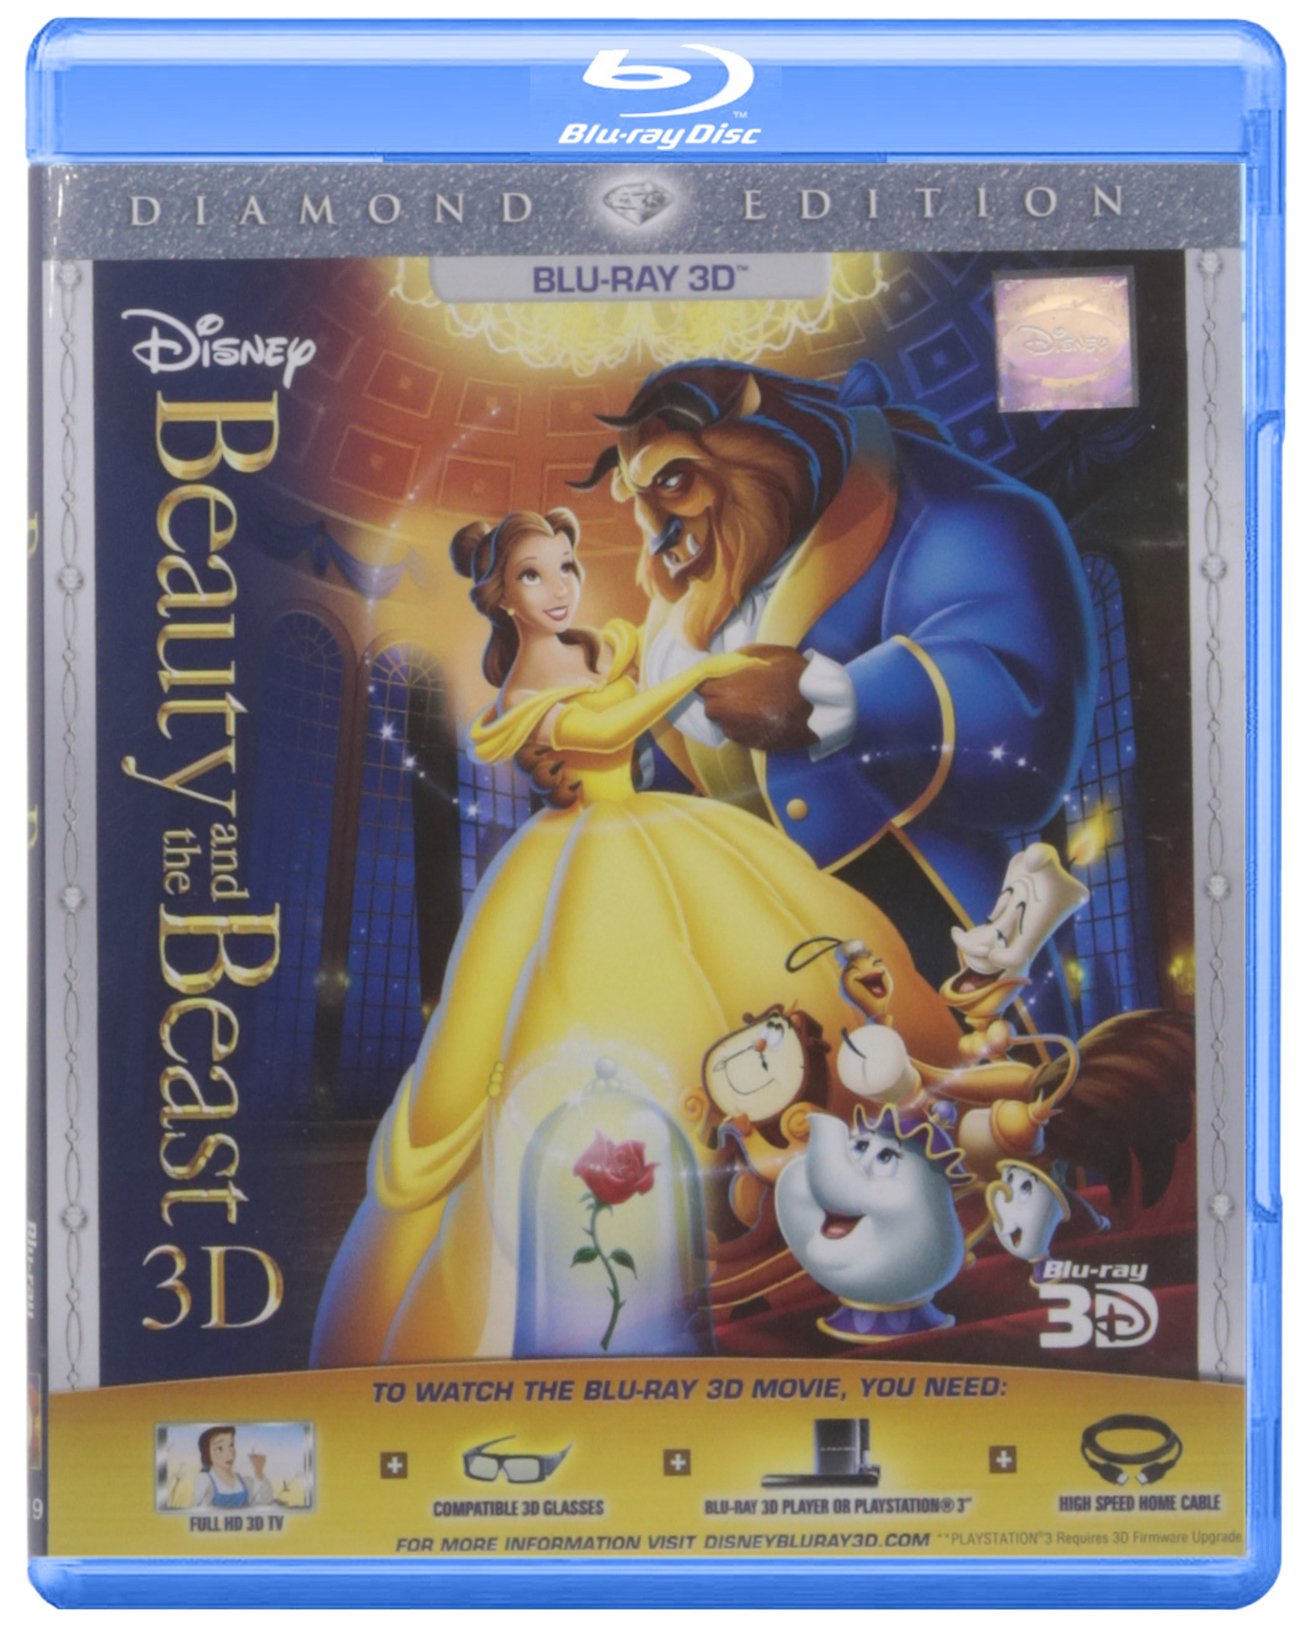 beauty-and-the-beast-diamond-edition-3d-movie-purchase-or-watch-on